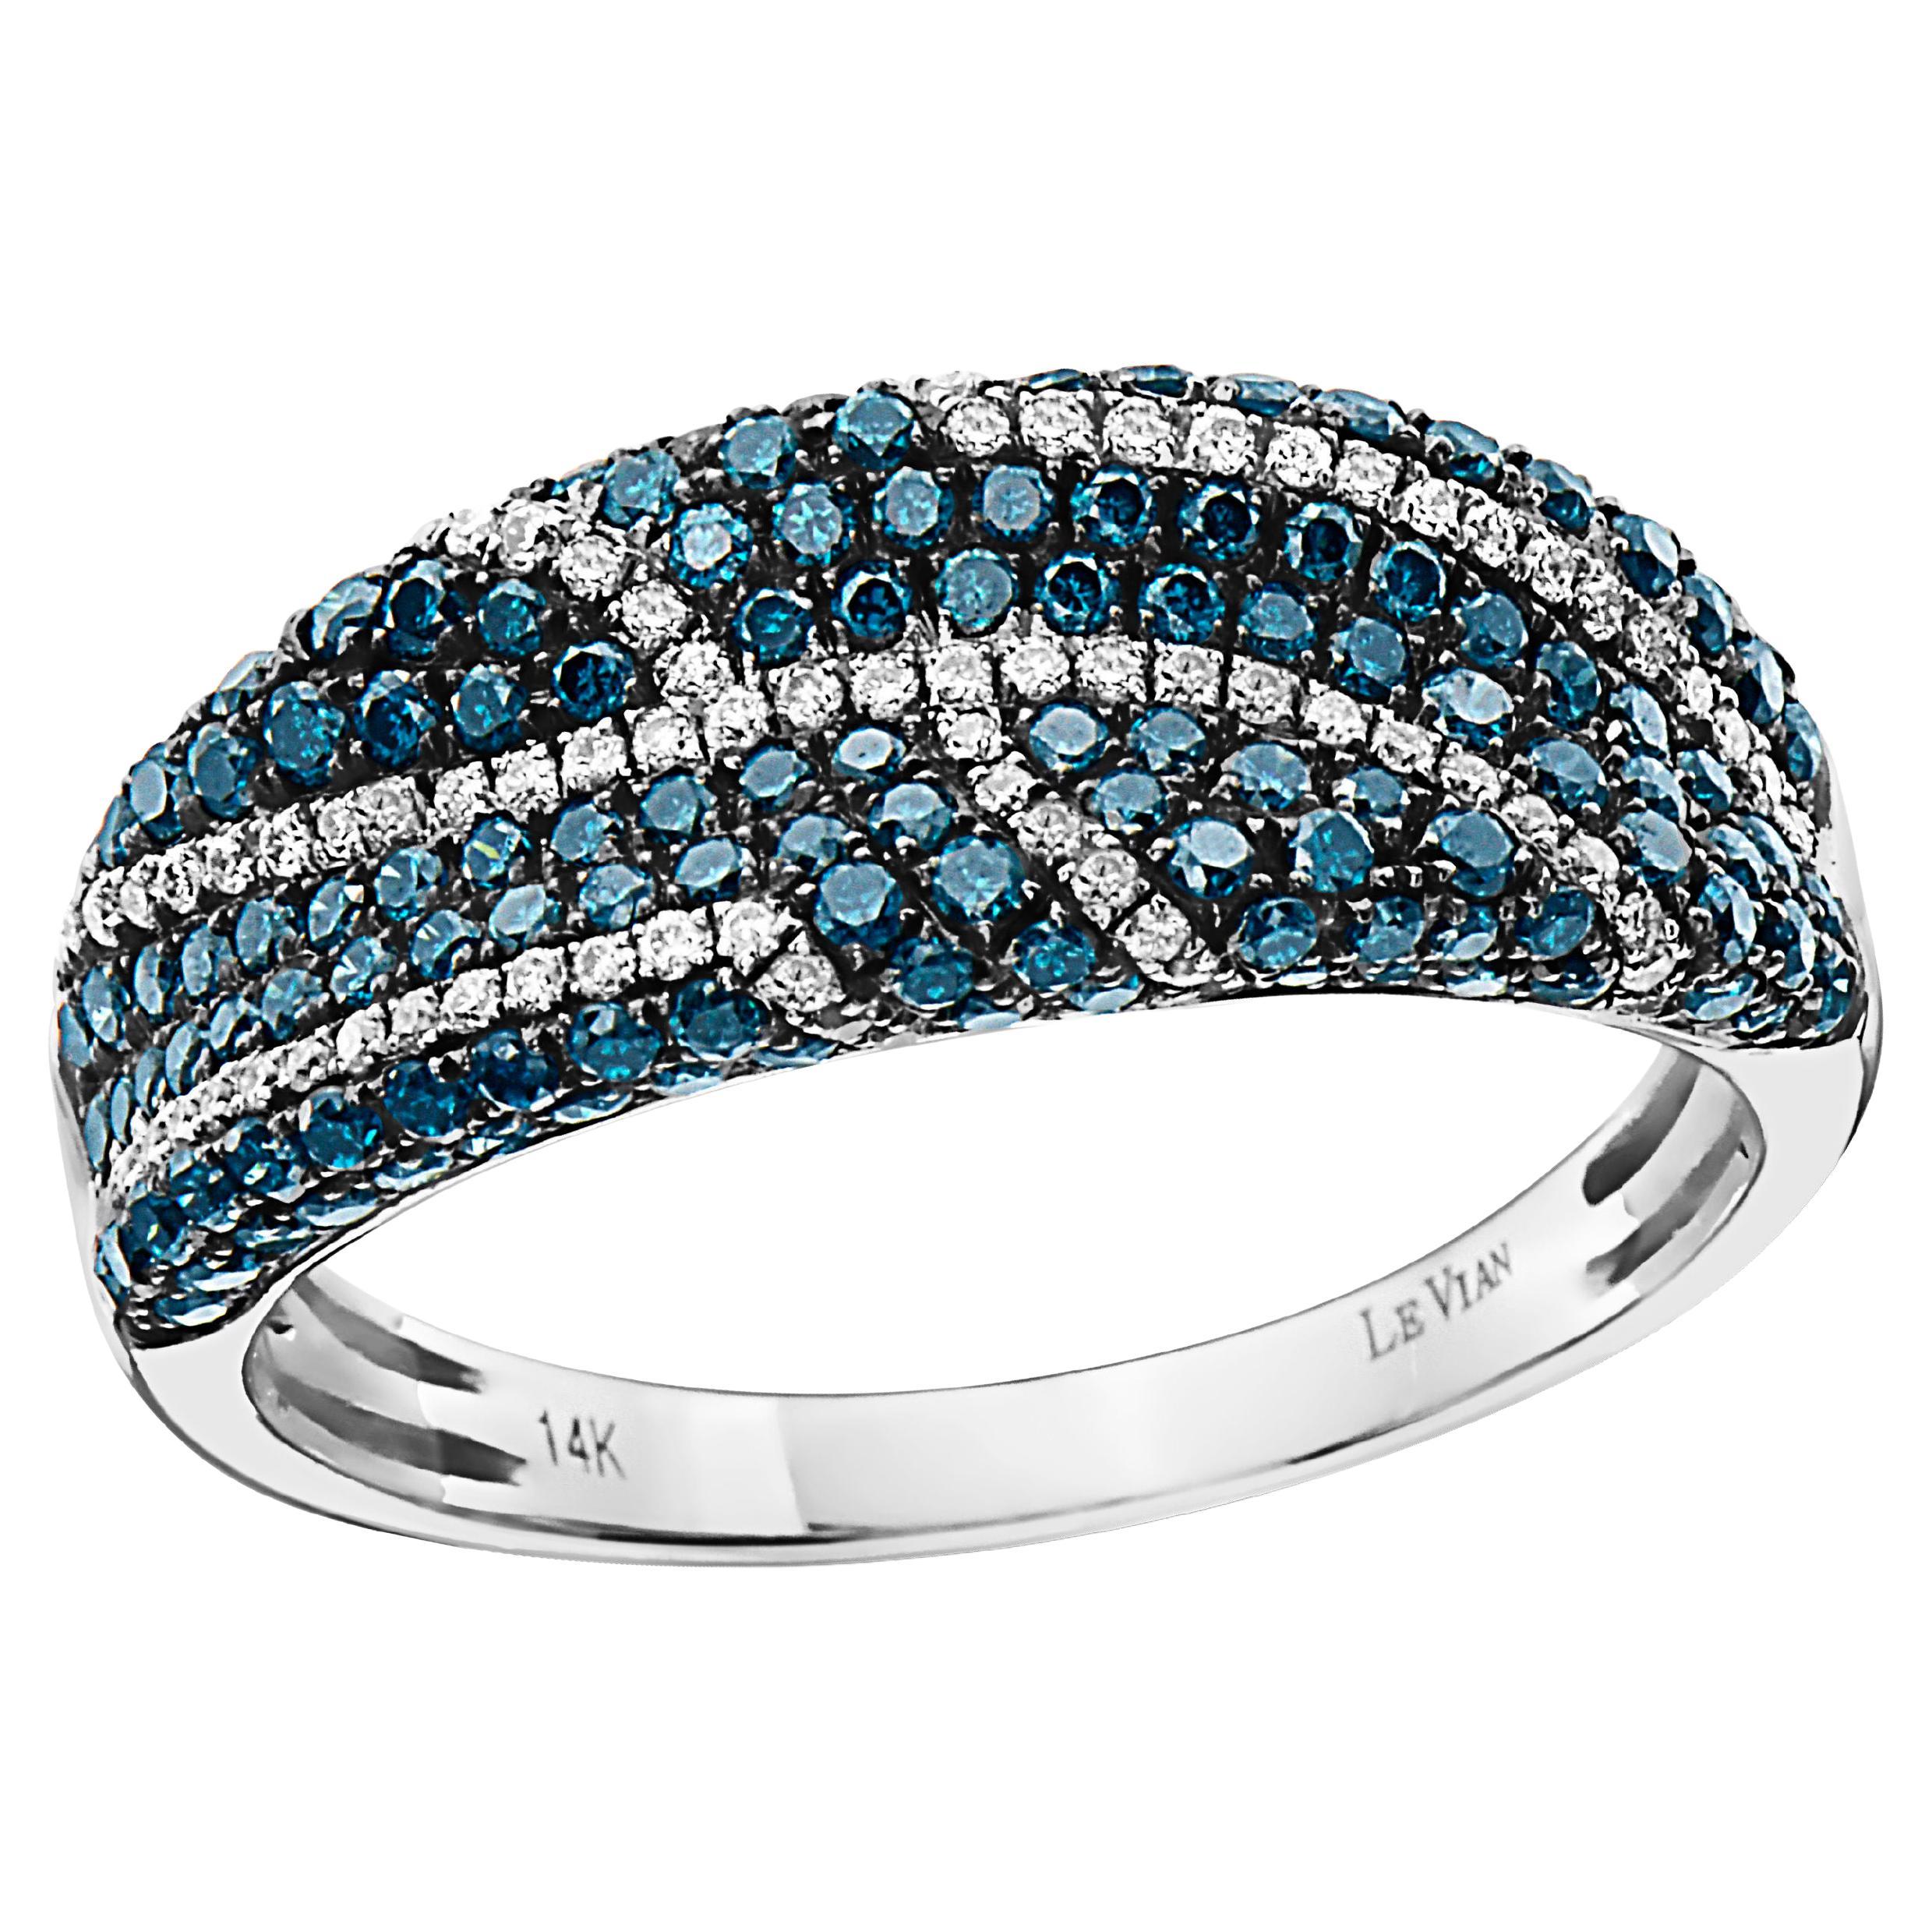 LeVian Ring 1 cts Blue and White Natural H SI1 Diamonds, set in 14K White Gold